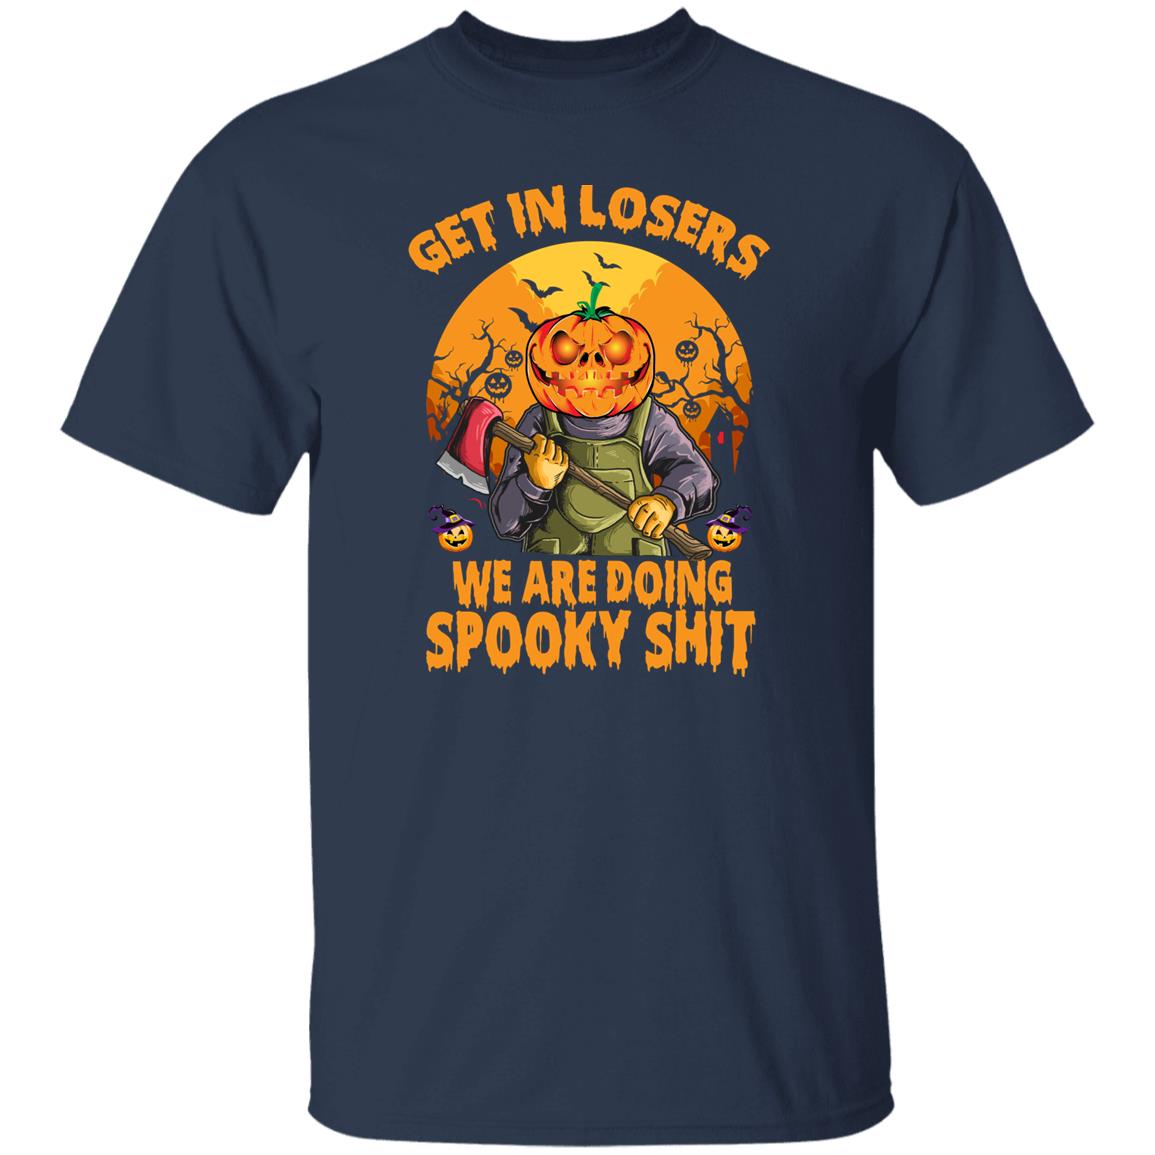 Get in Losers We Are Doing Spooky Shit Funny Halloween Shirt